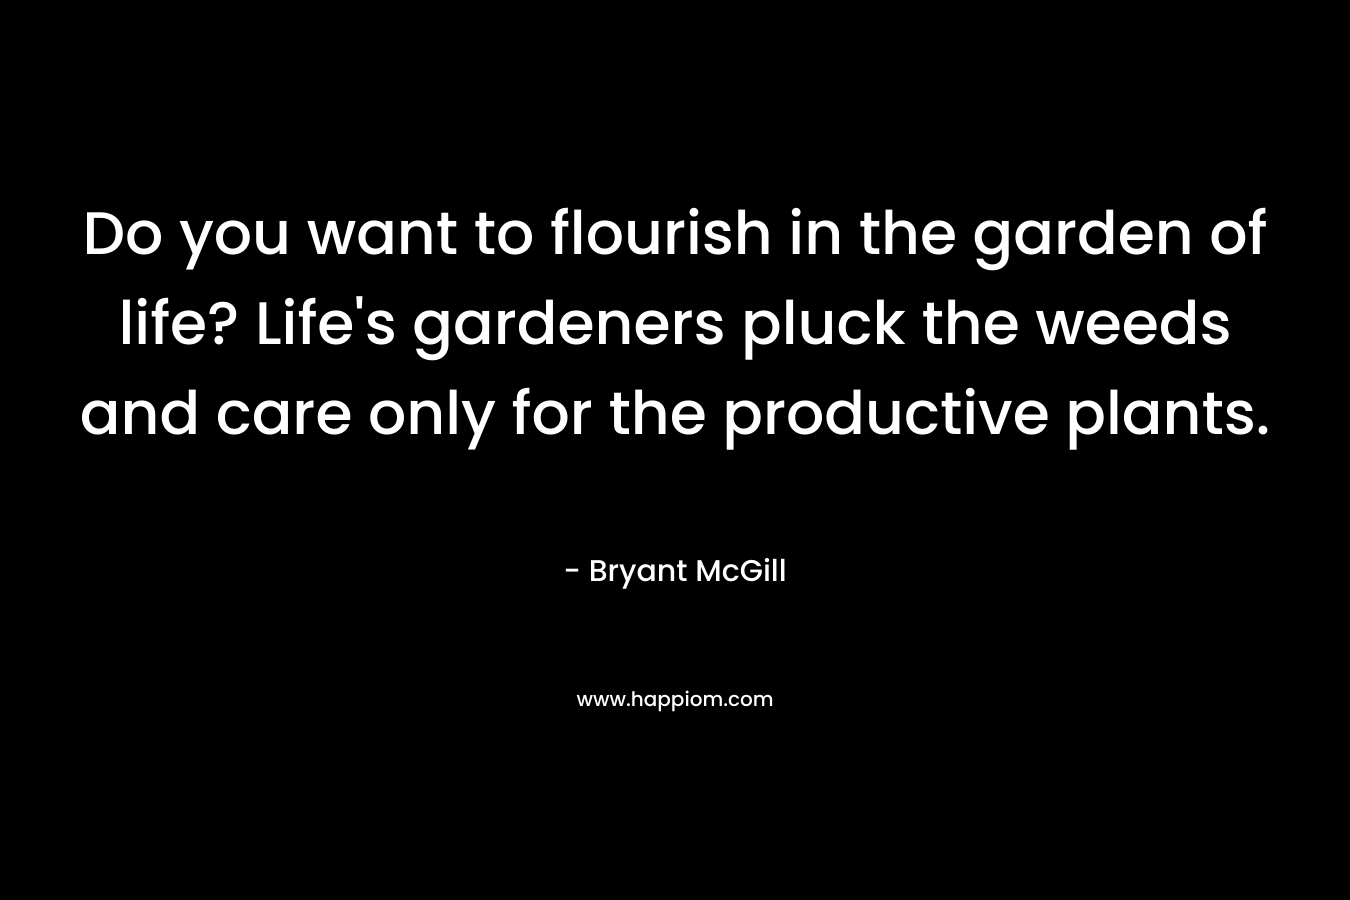 Do you want to flourish in the garden of life? Life’s gardeners pluck the weeds and care only for the productive plants. – Bryant McGill